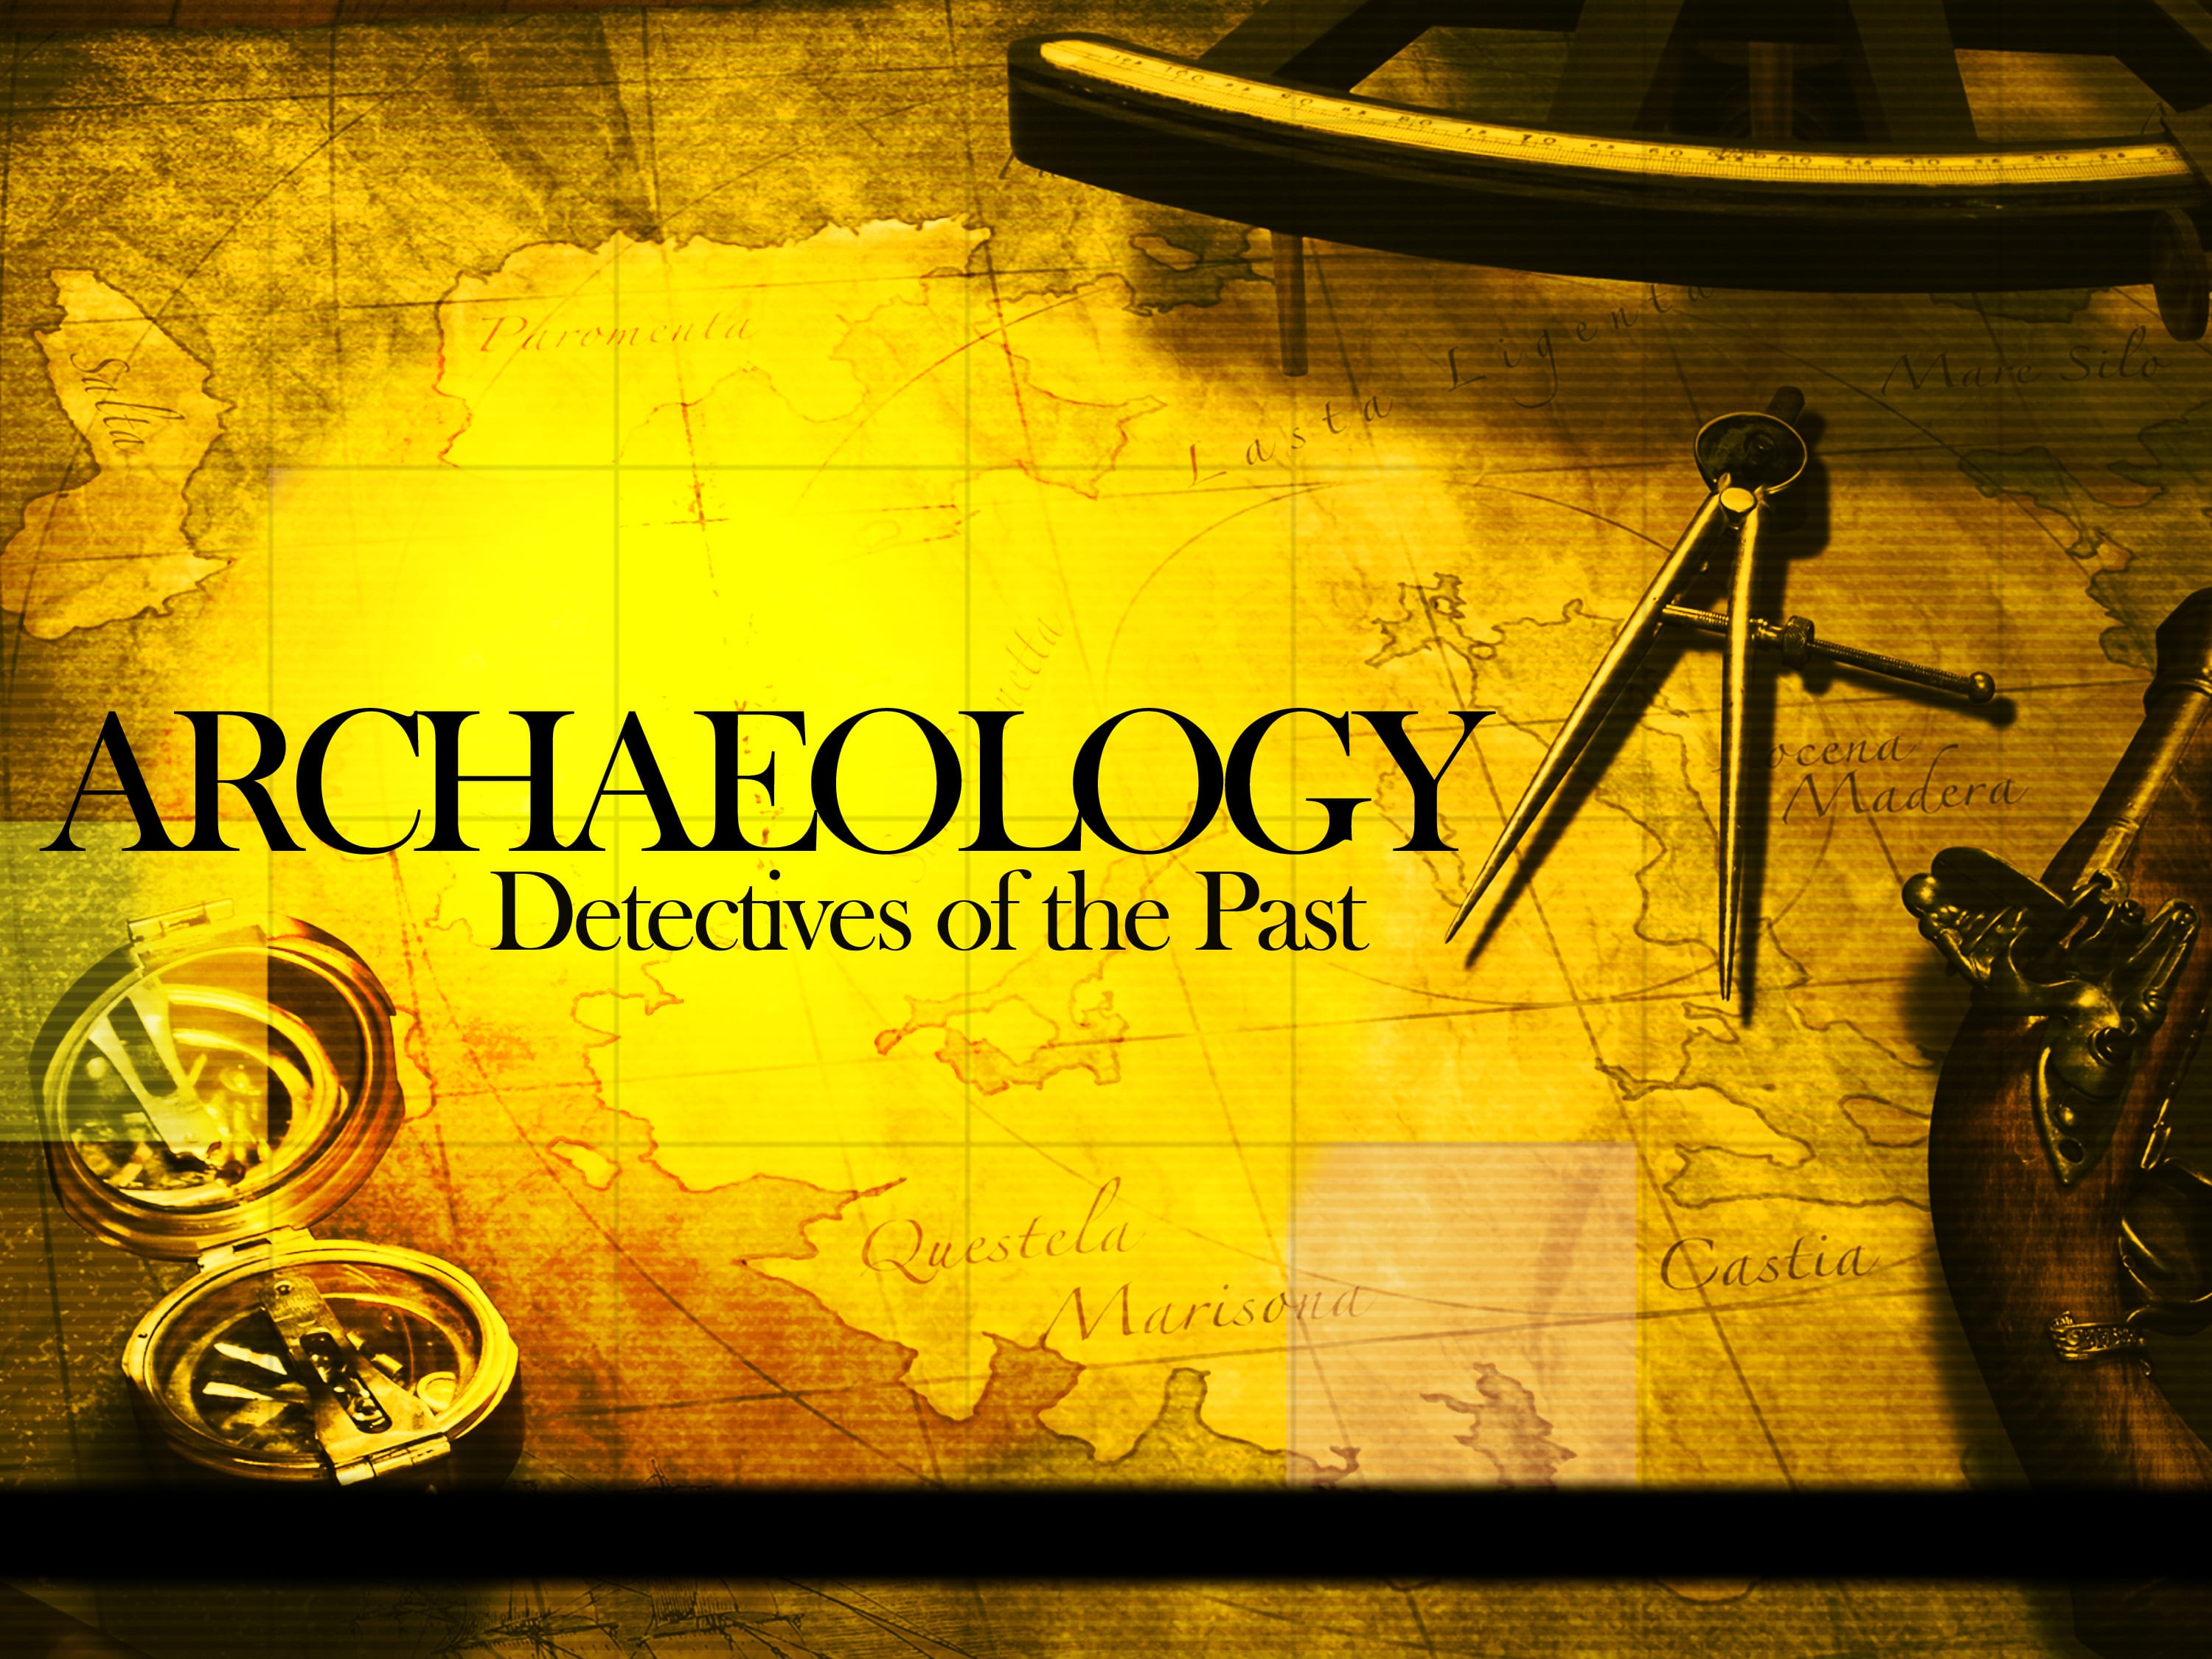 Archaeology Course